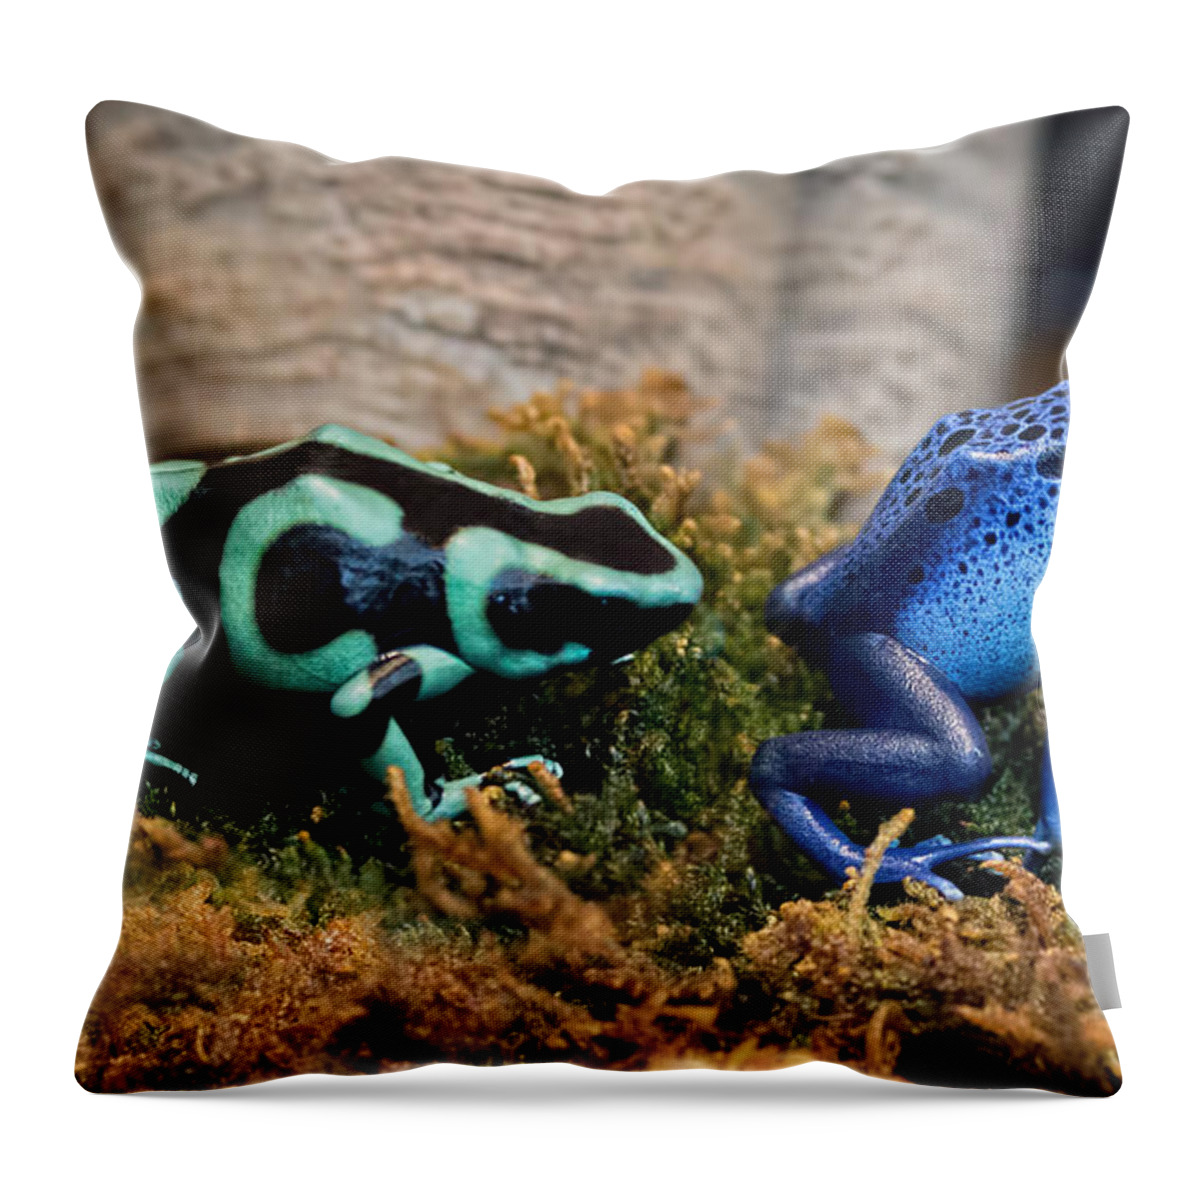 Poison Dart Frog Throw Pillow featuring the photograph Colorful But Deadly Poison Dart Frogs by Barbara McMahon